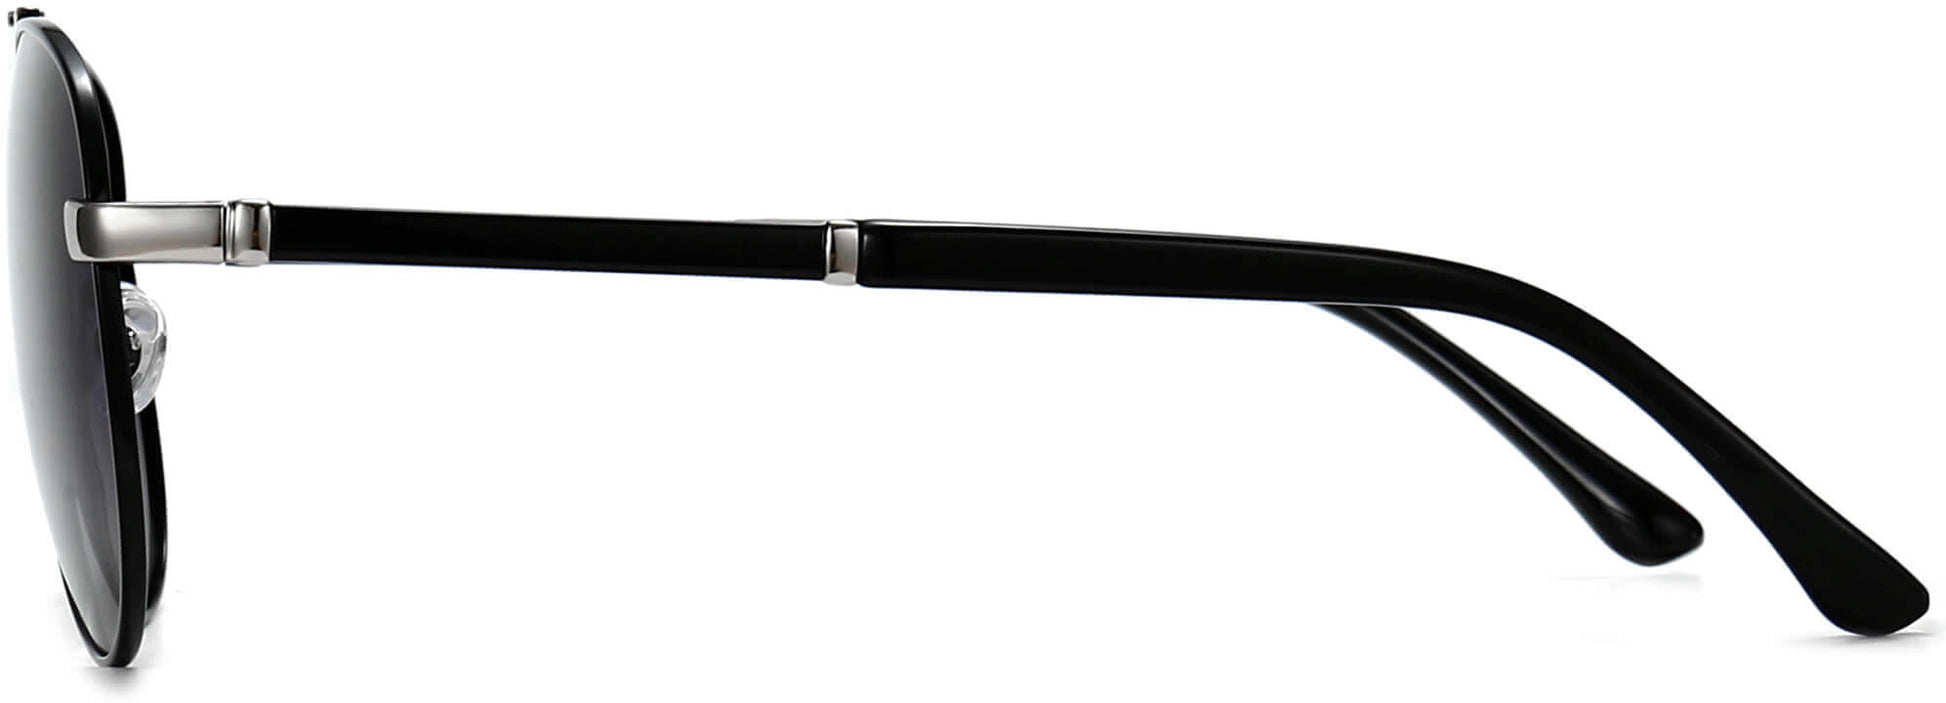 Richard Black Stainless steel Sunglasses from ANRRI, side view